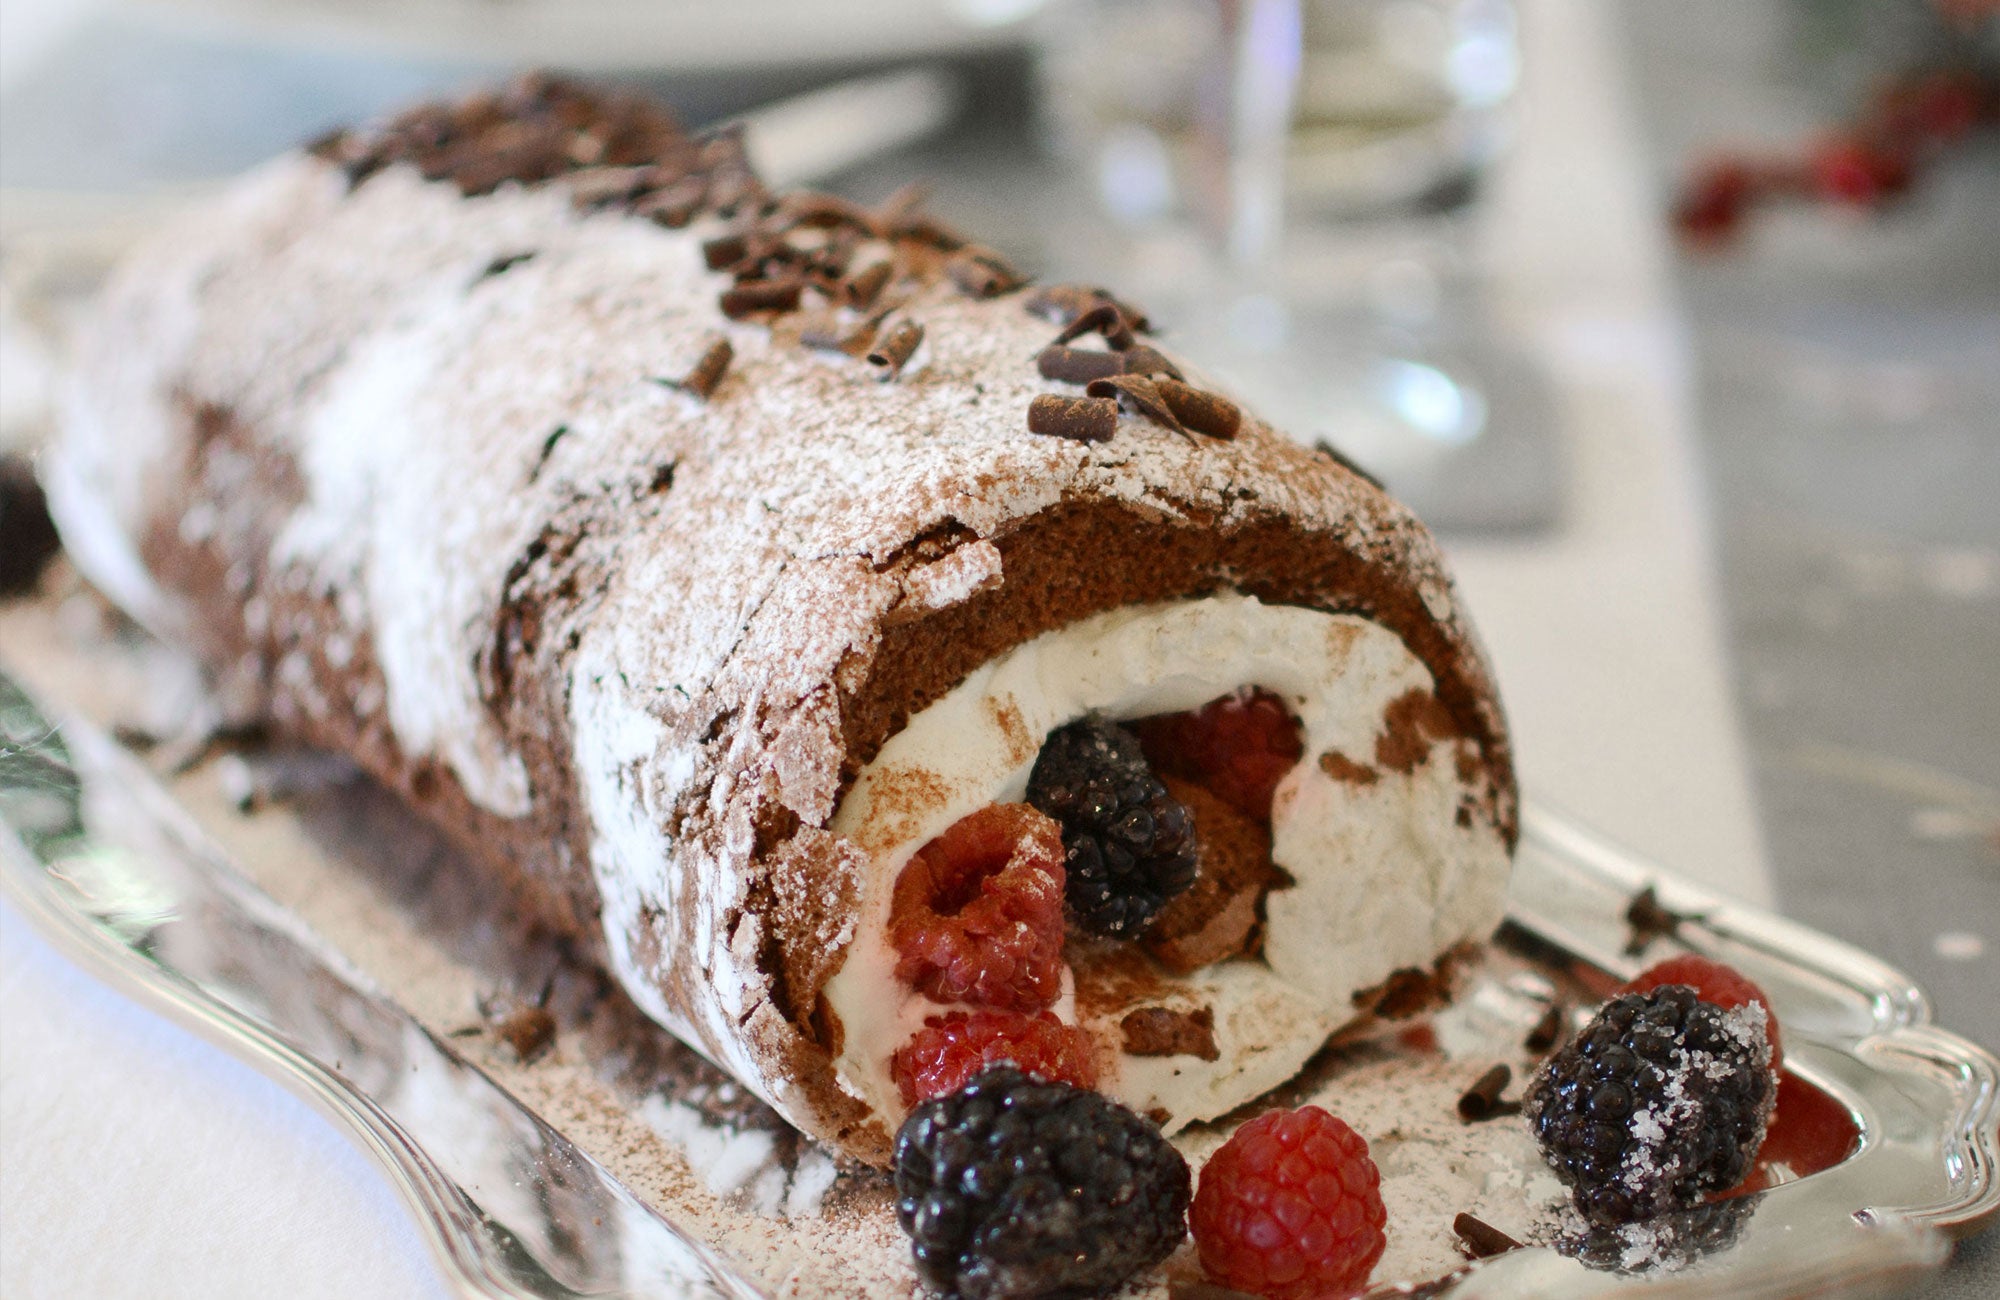 Simple chocolate roulade recipe with berries. Make a great Christmas yule log.